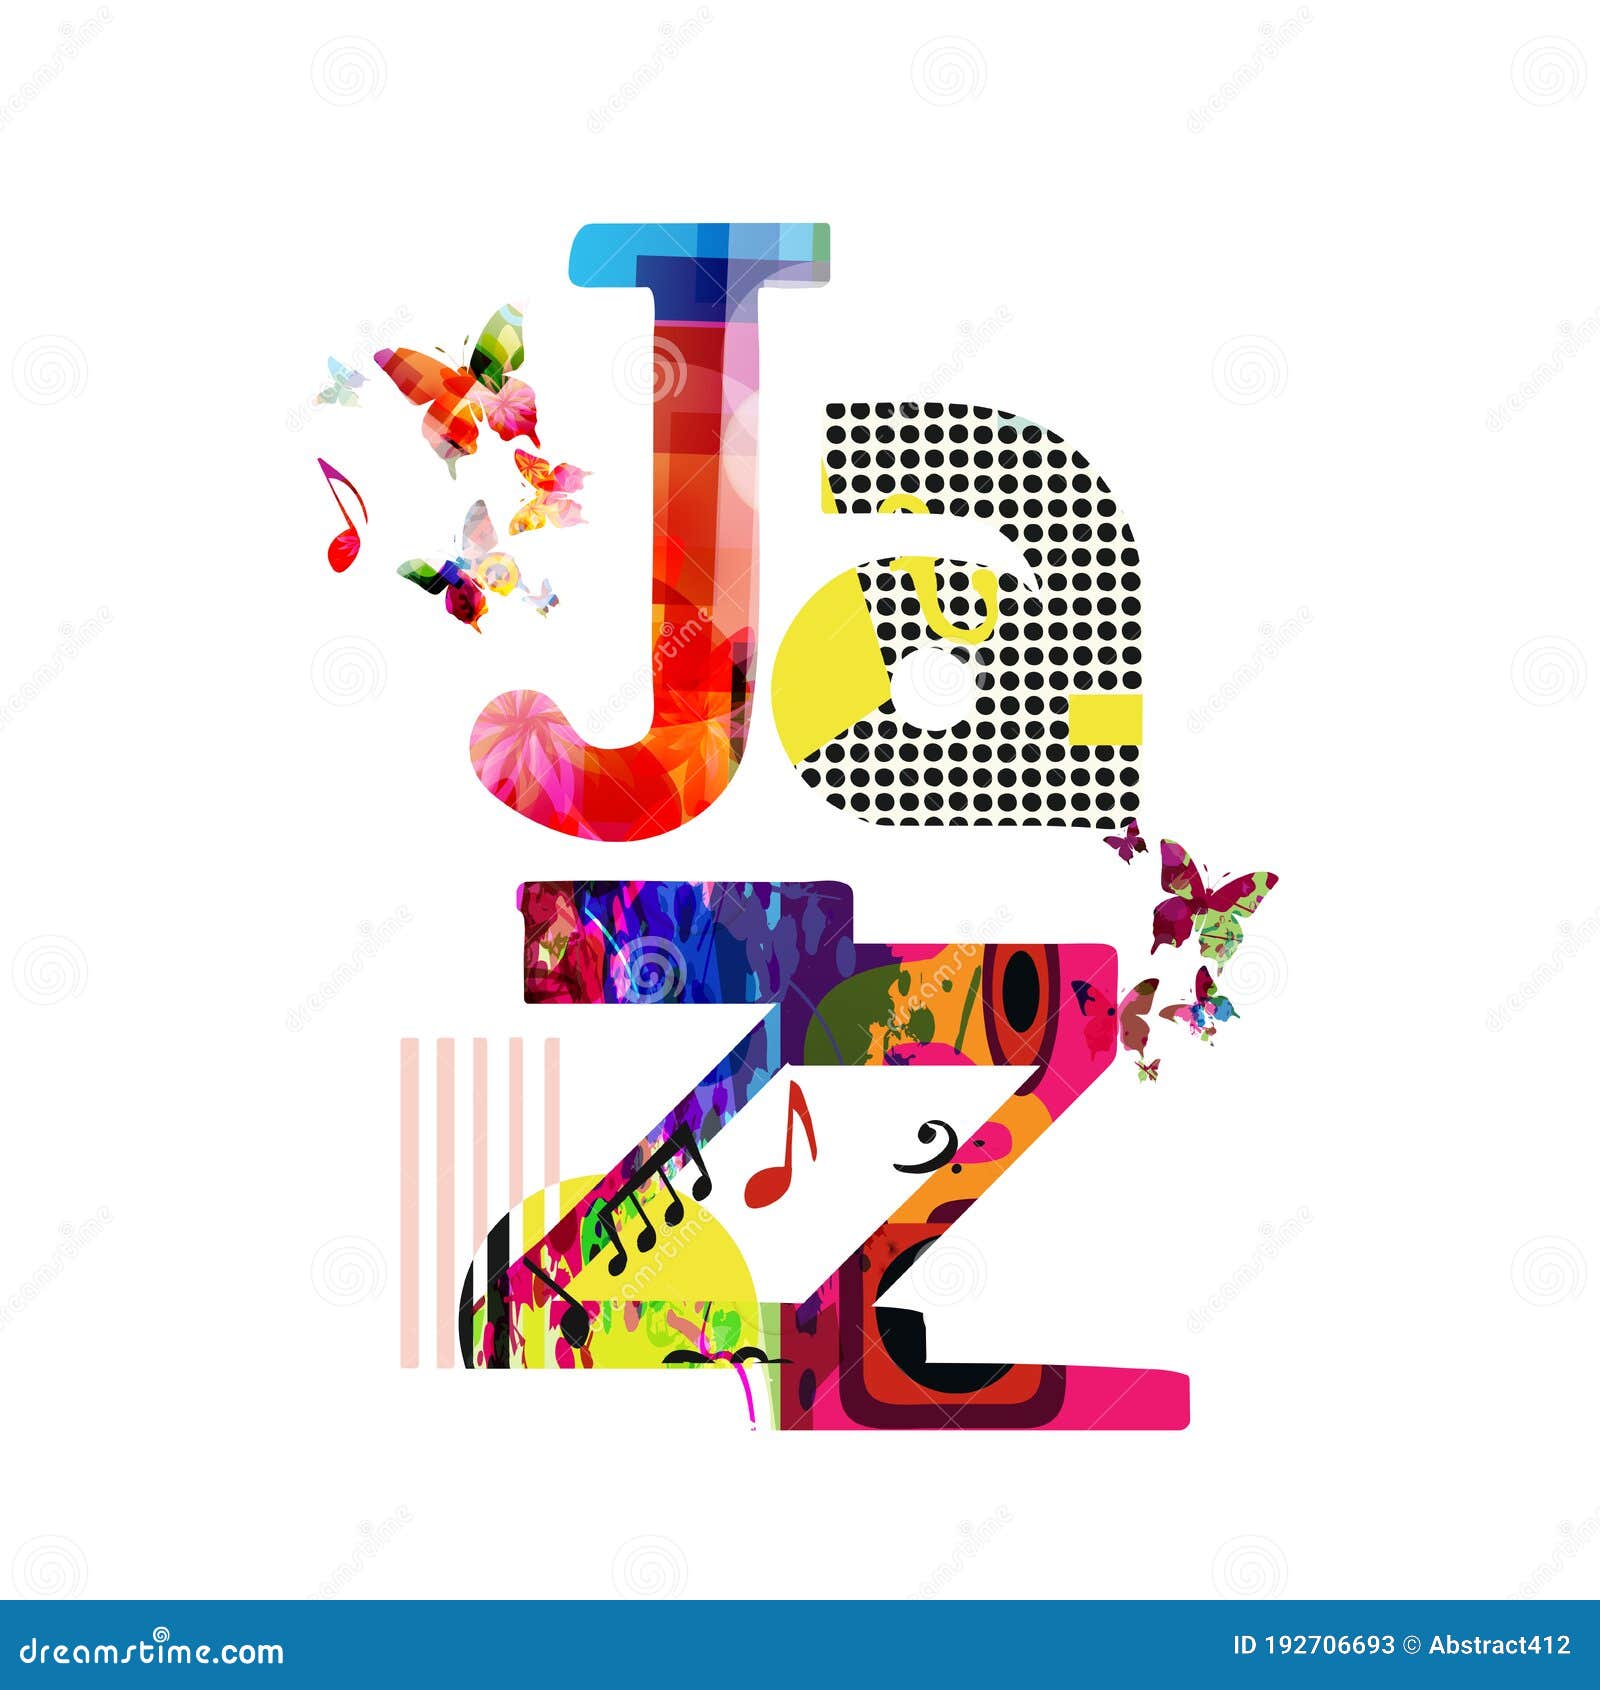 jazz music typographic colorful background  . artistic music festival poster, live concert, creative banner de